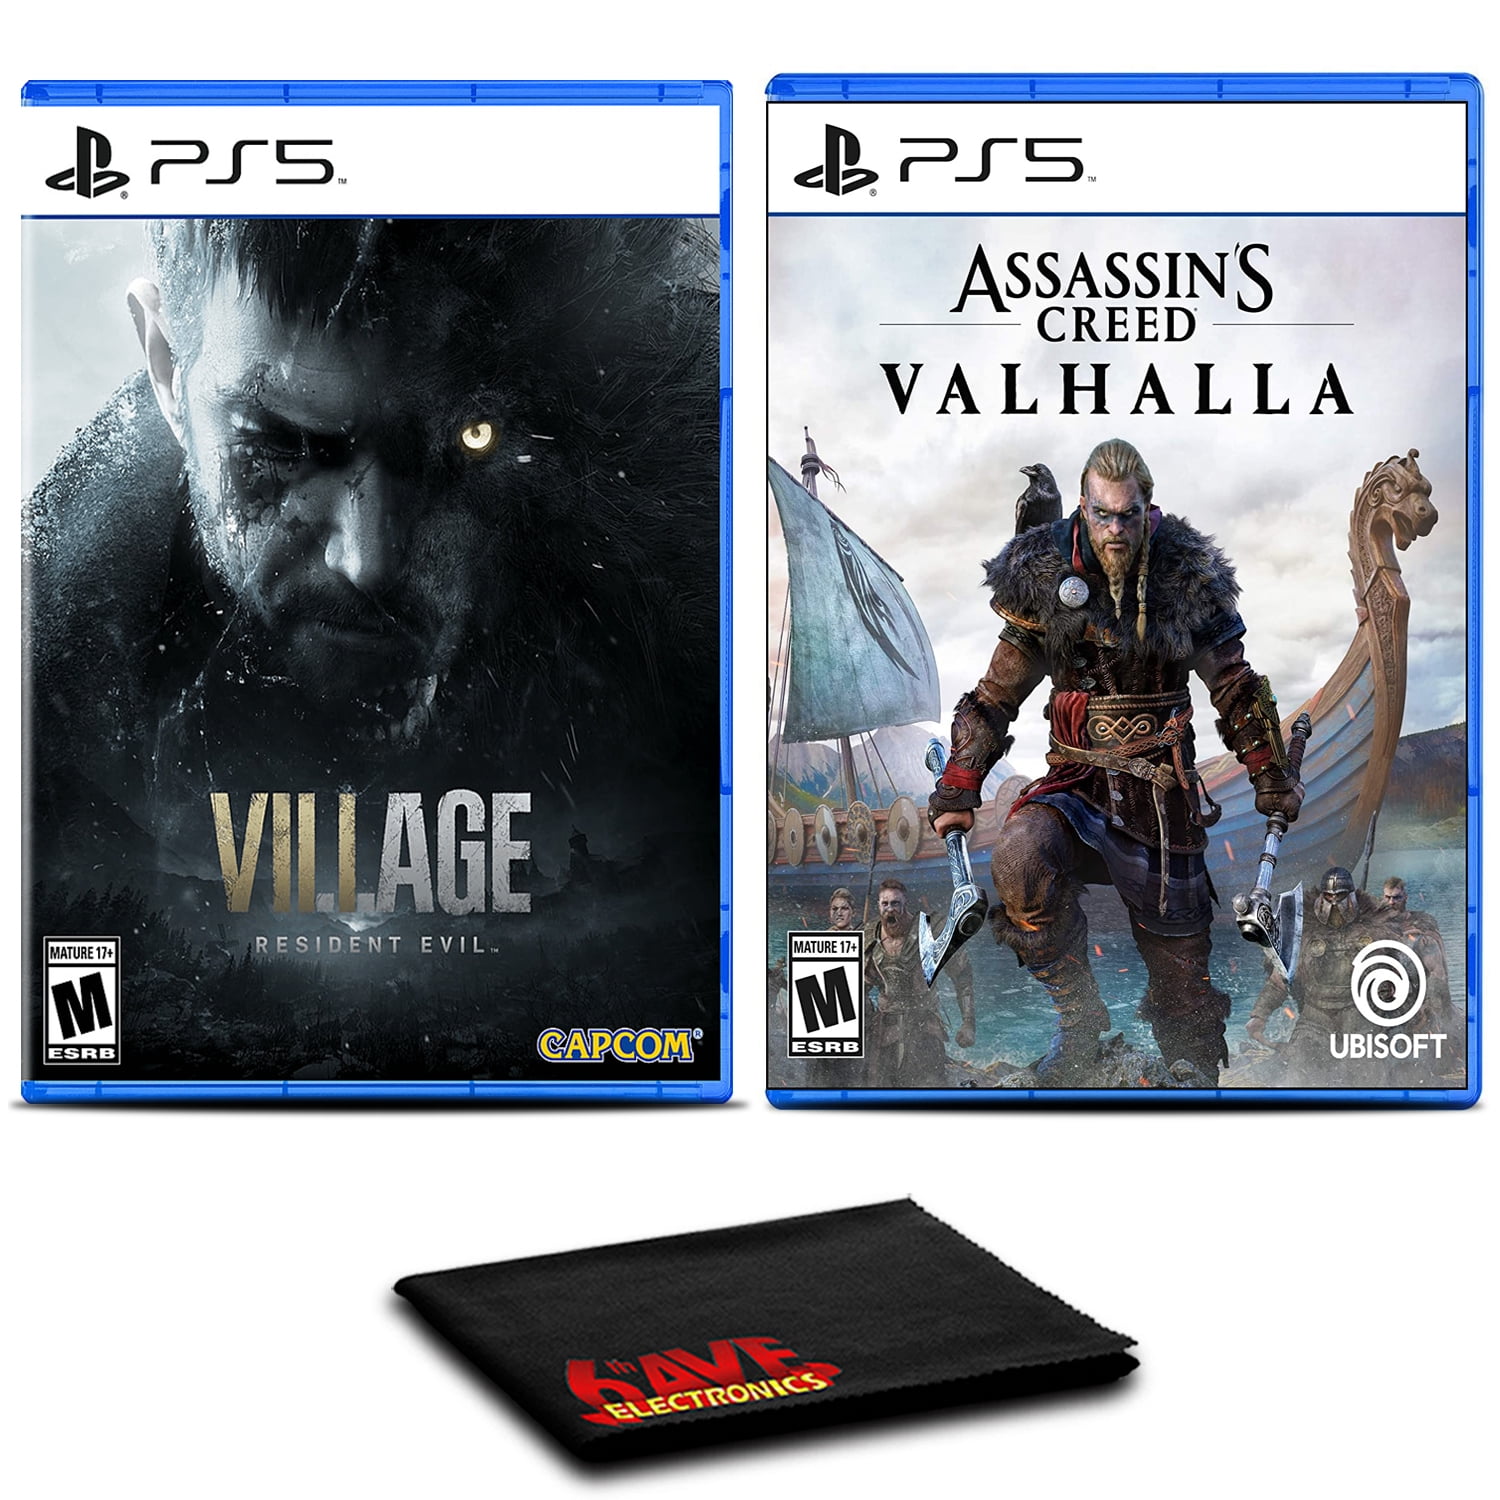 Ассасин Вальгалла ps4. Assassin's Creed Valhalla ps5. Ps5 Chivalry 2 Steelbook Edition Gameplay. Вальгалла пс 5